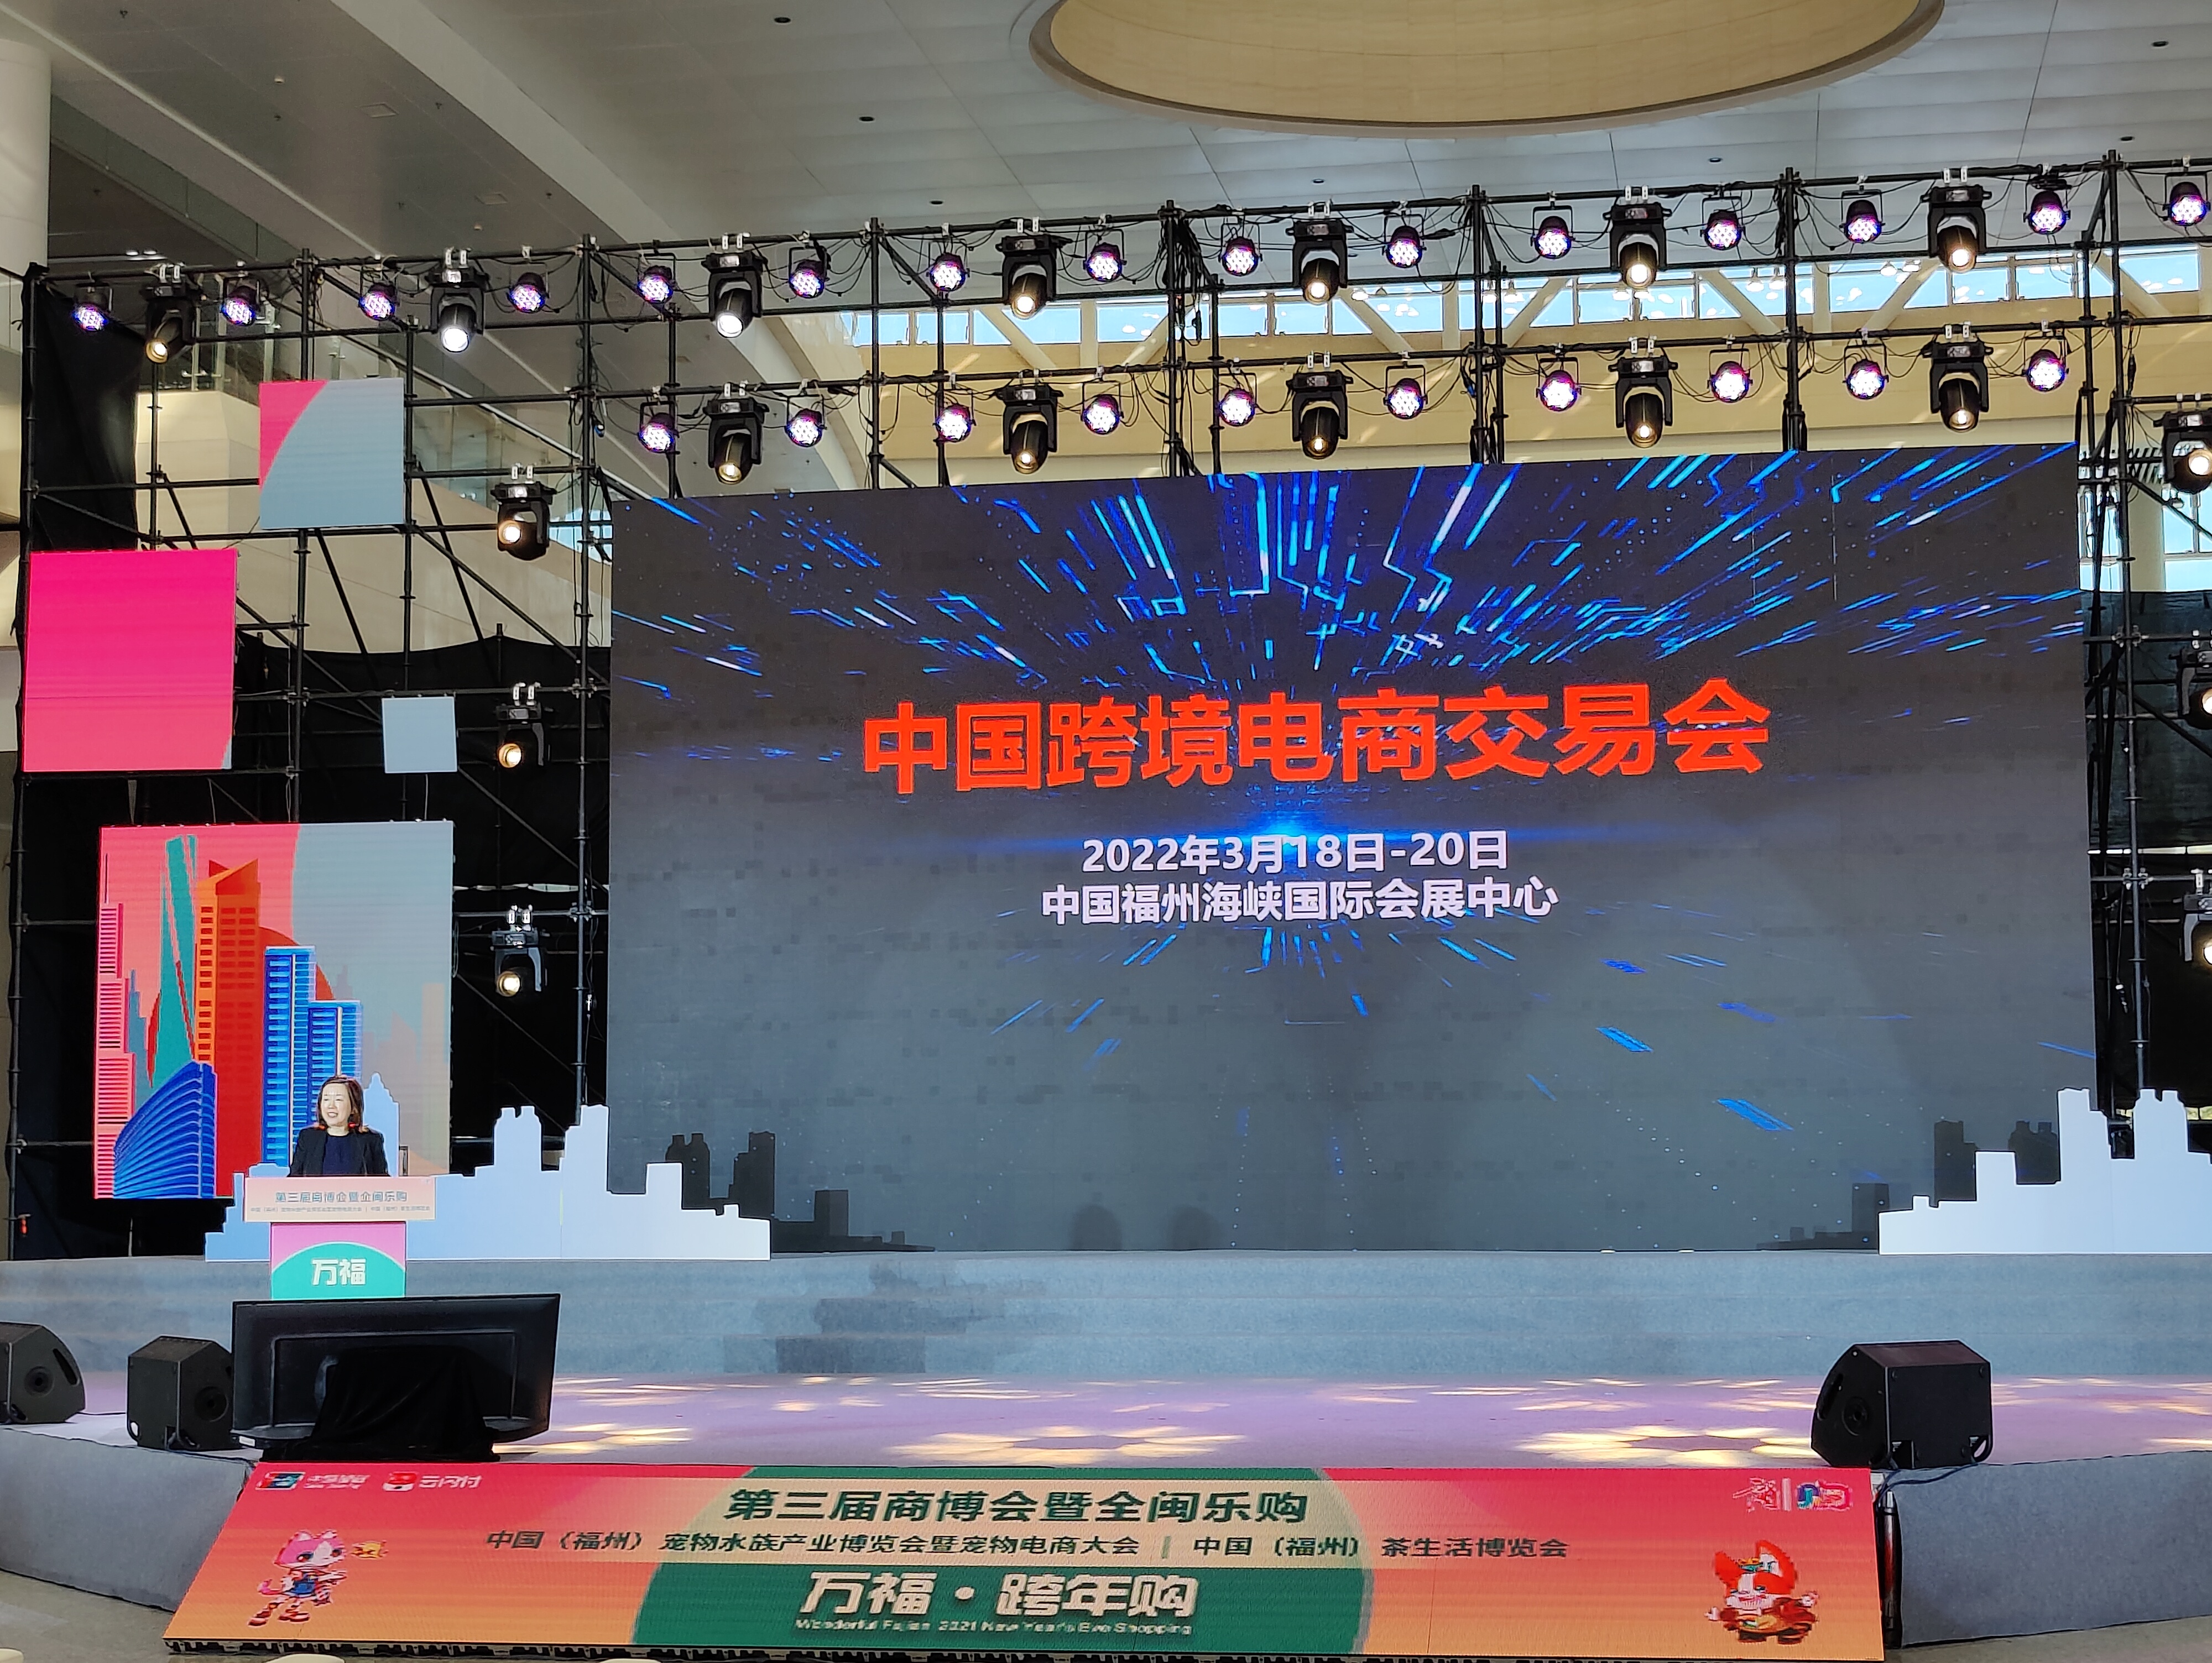 China International Trade Fair holds information conference in Fuzhou